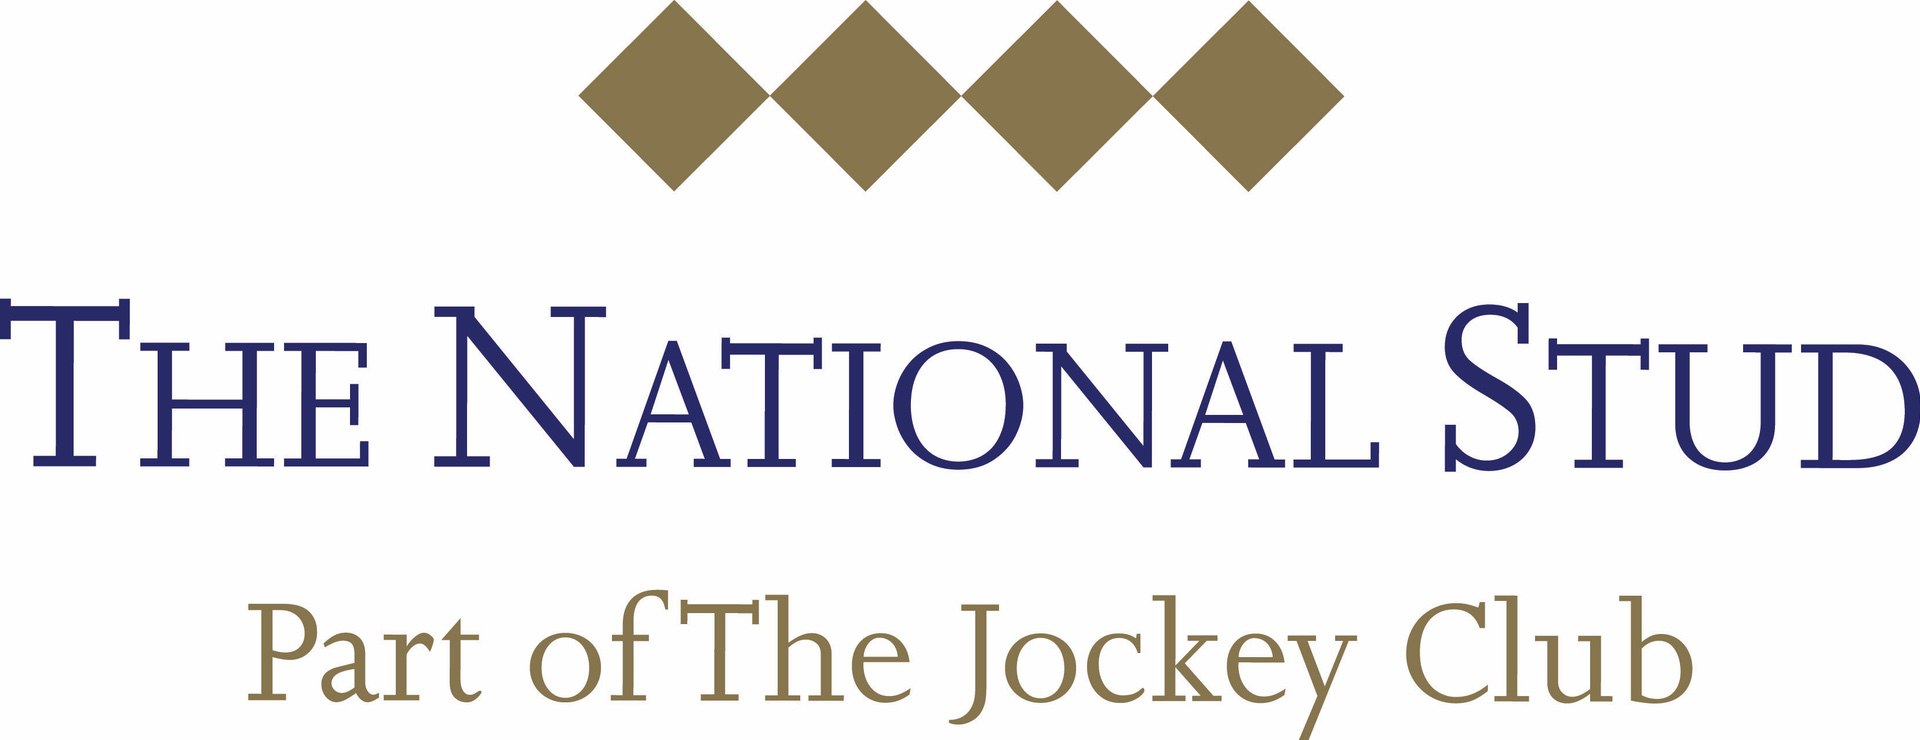 The National Stud - Part of the Jocky Club